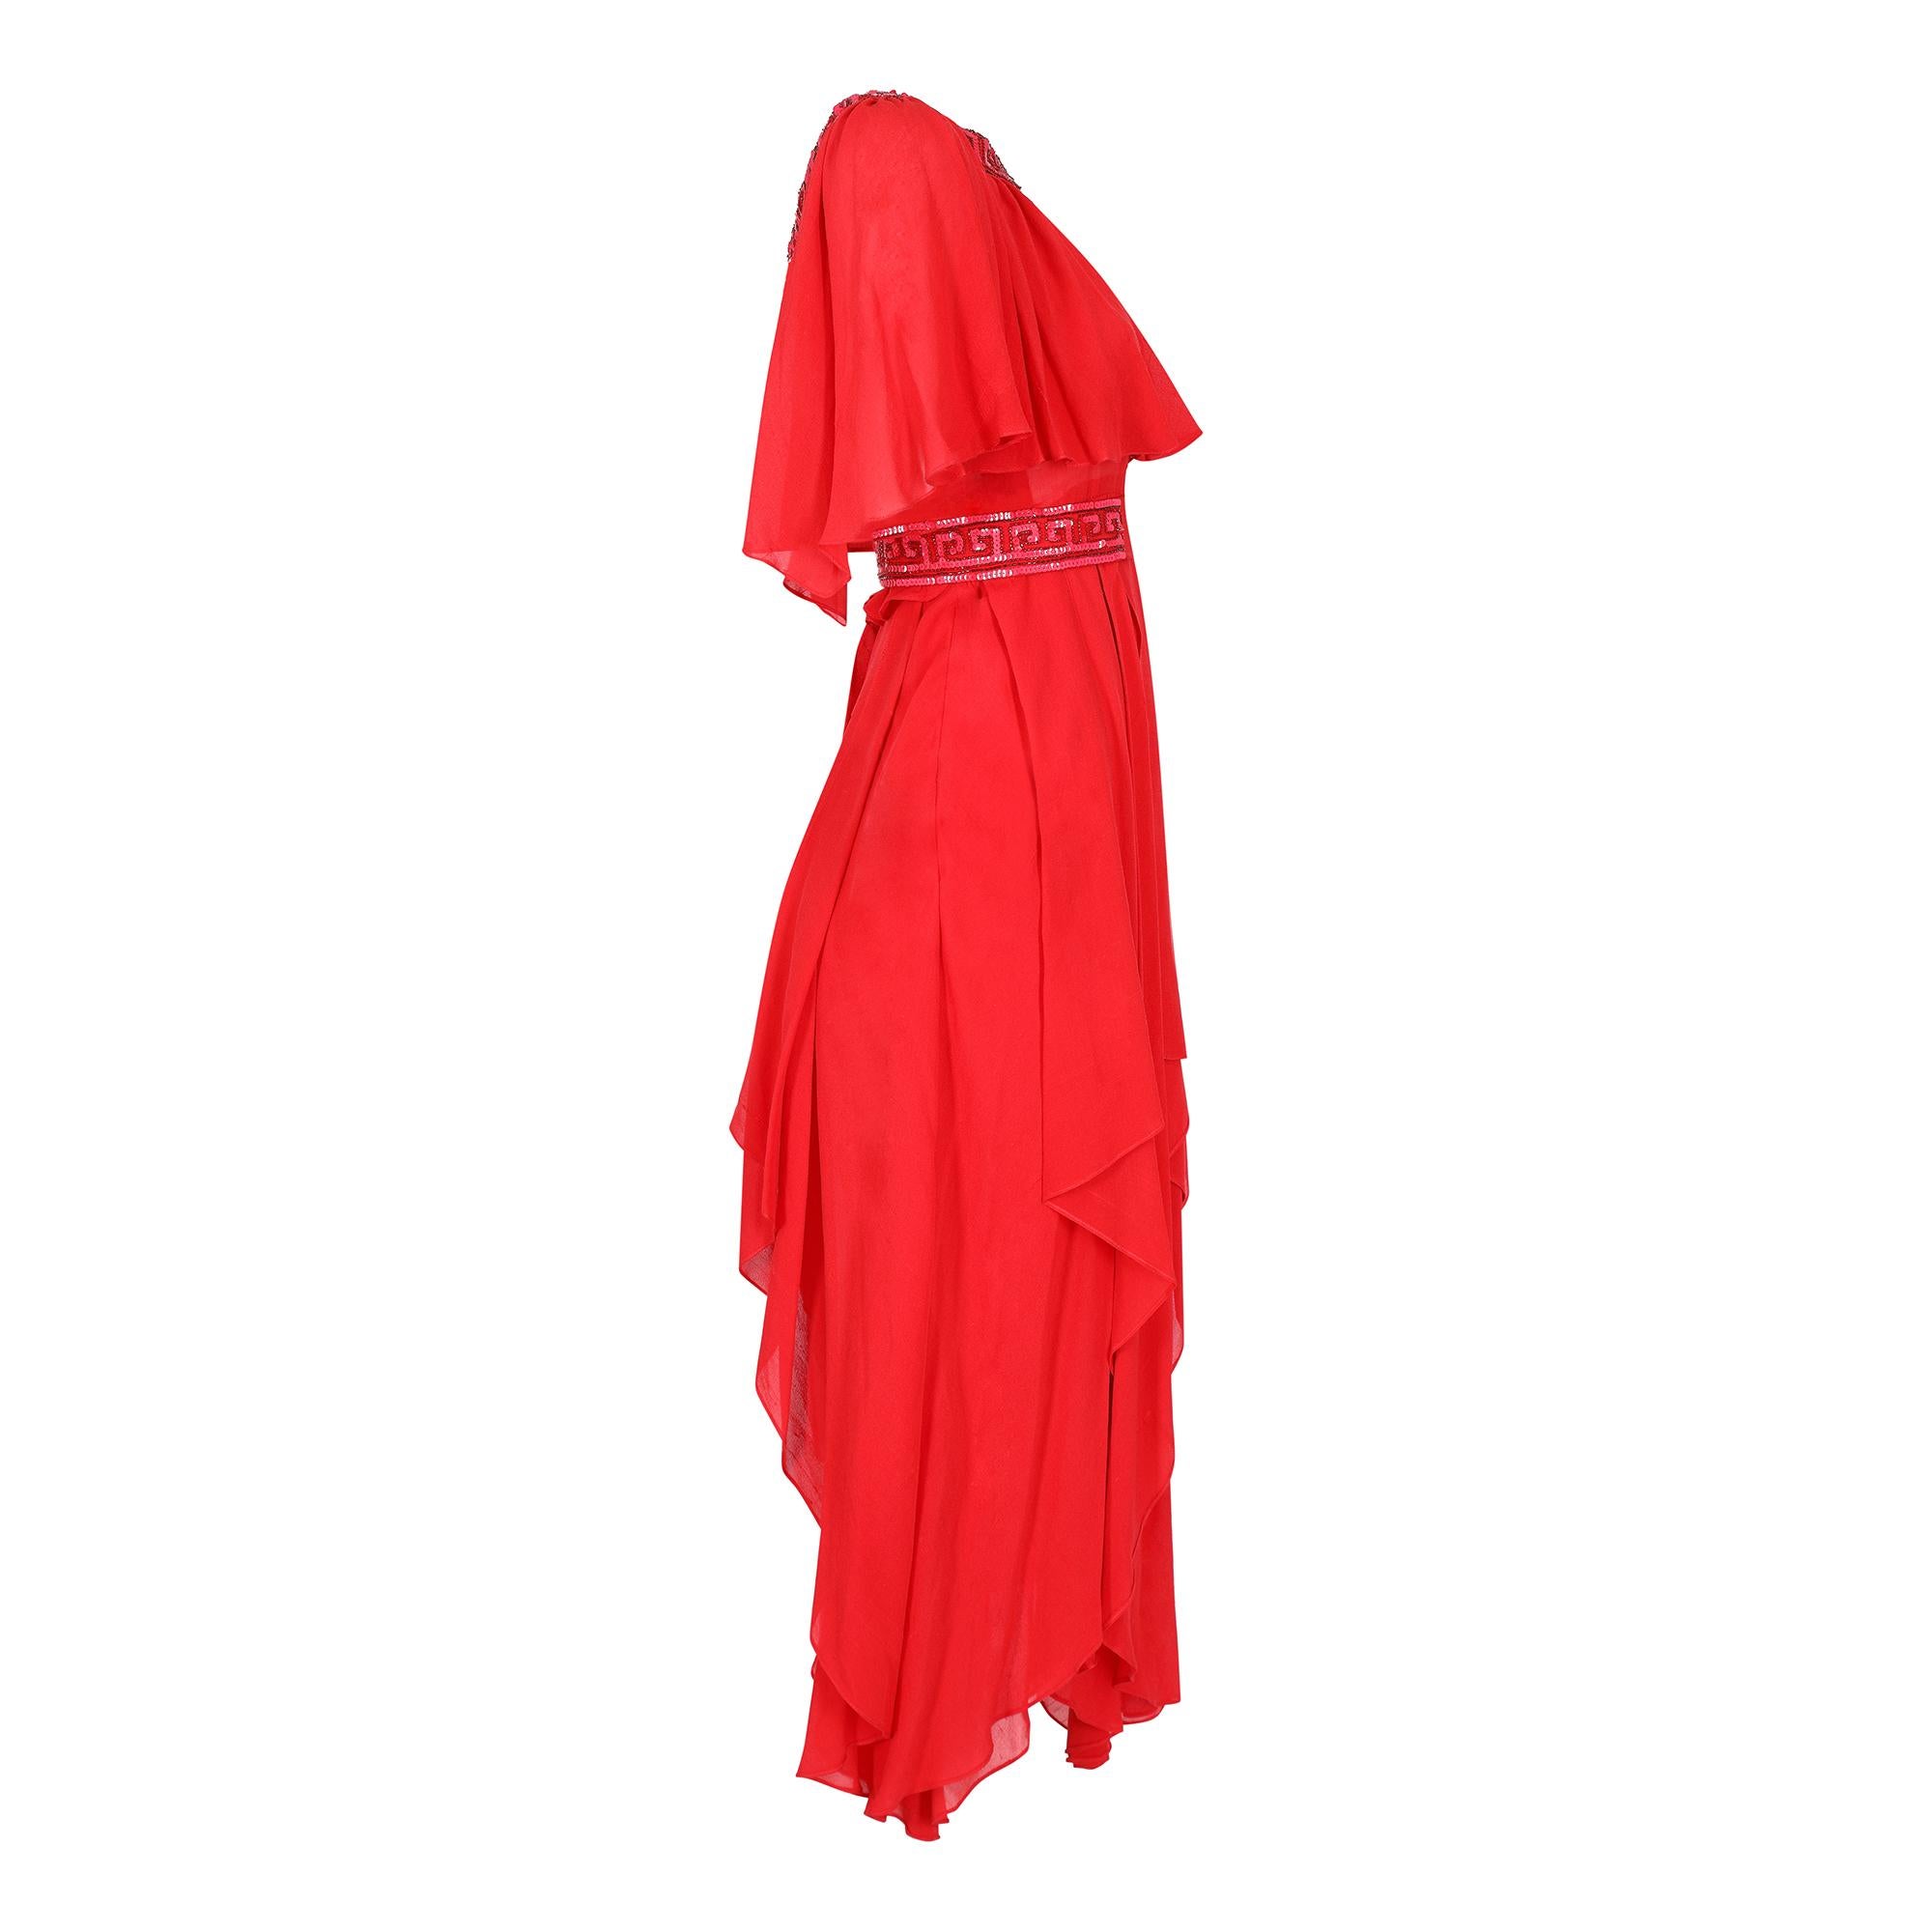 This Ted Lapidus dress is circa 1977 and is made entirely by hand; this label is probably the haute couture label. The beautiful flame red, raw silk georgette fabric is both striking and feminine. The dress features an embellished, wide scoop